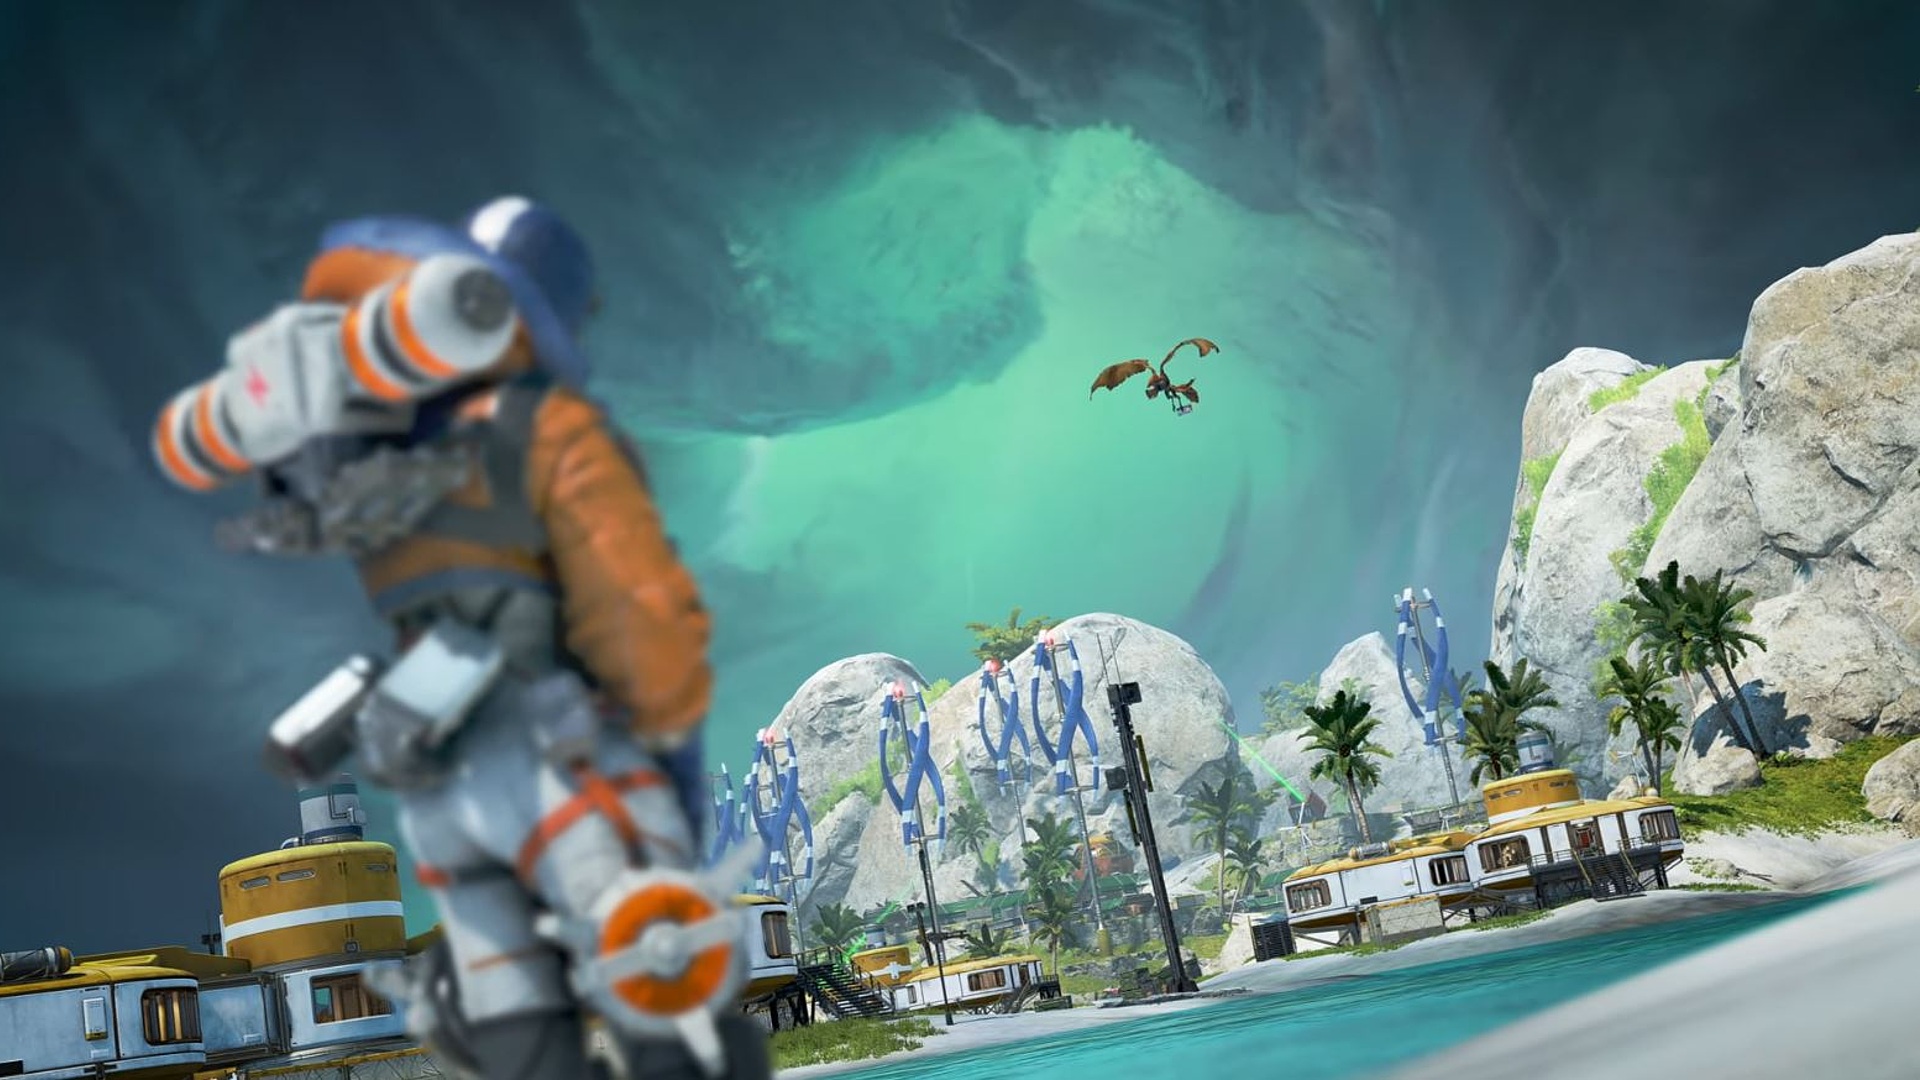 Apex Legends new map: Wattson looks over the new Apex Legends map Storm Point, which features a stormy sky, palm trees, and tall cliff faces.